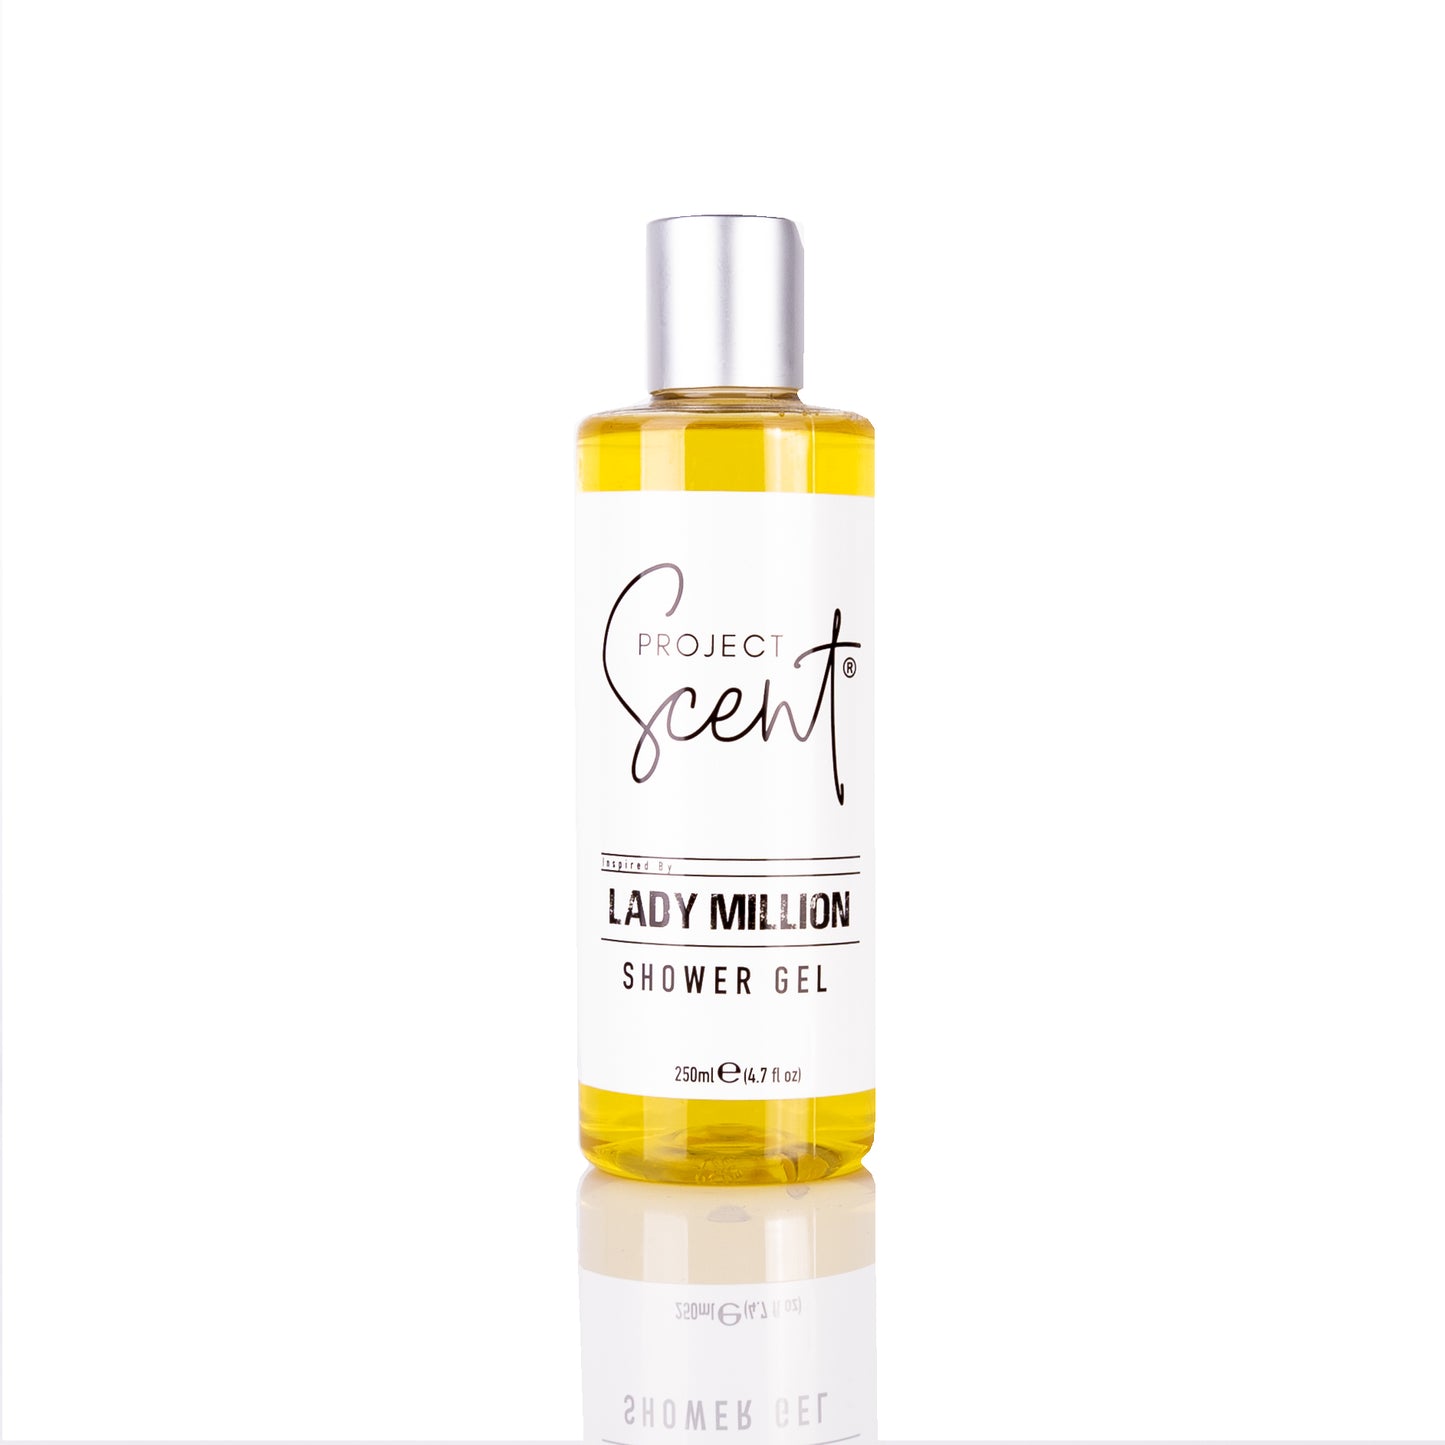 New Project Scent Shower Gel